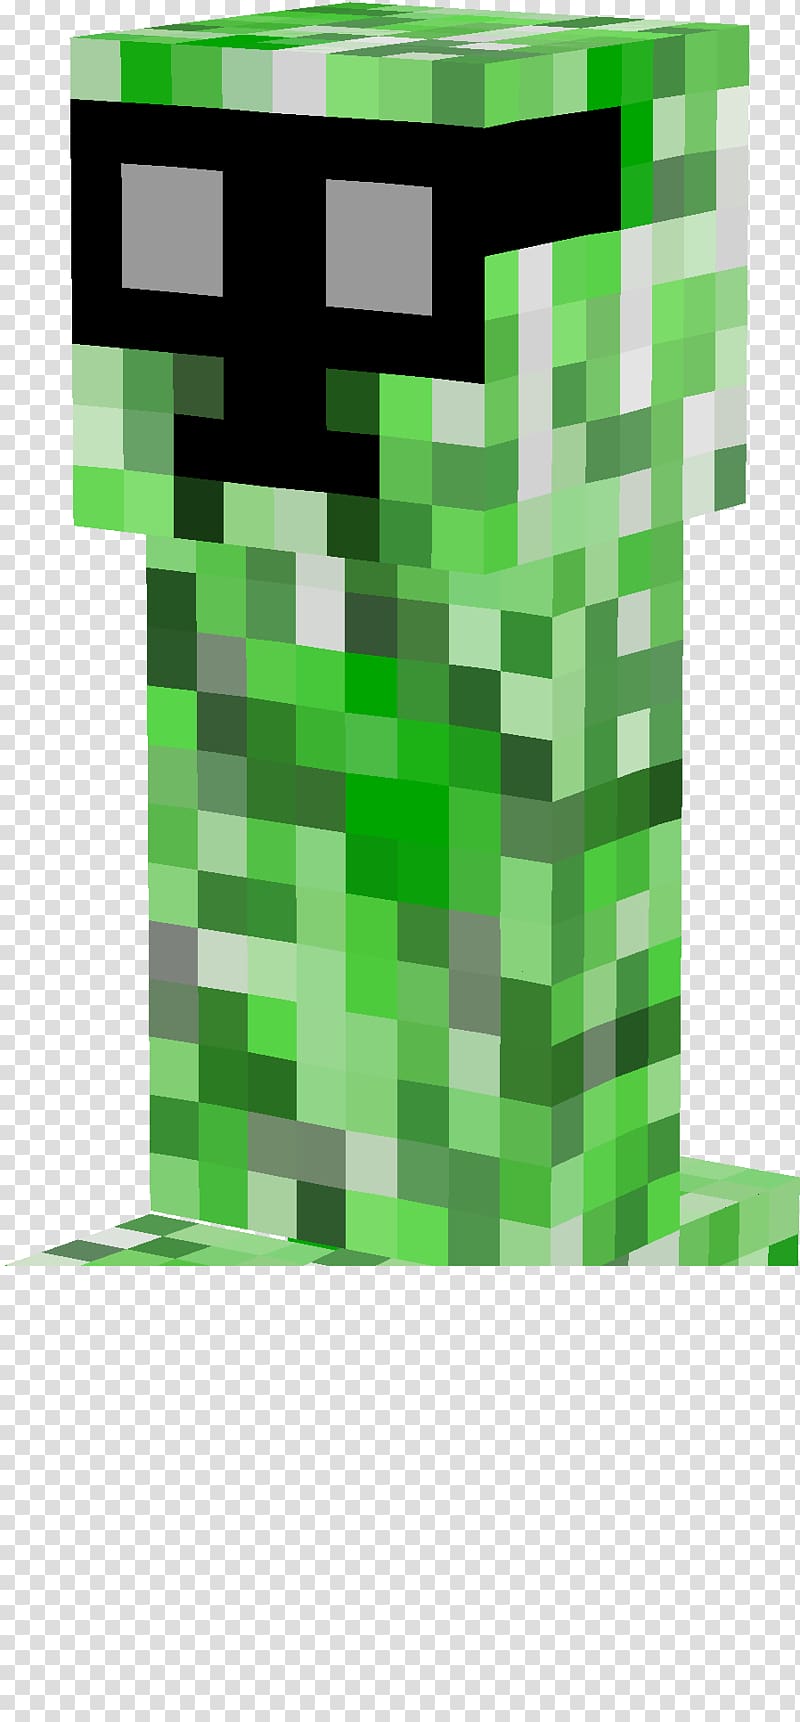 Minecraft: Pocket Edition Minecraft: Story Mode Mob Creeper, skin transparent background PNG clipart